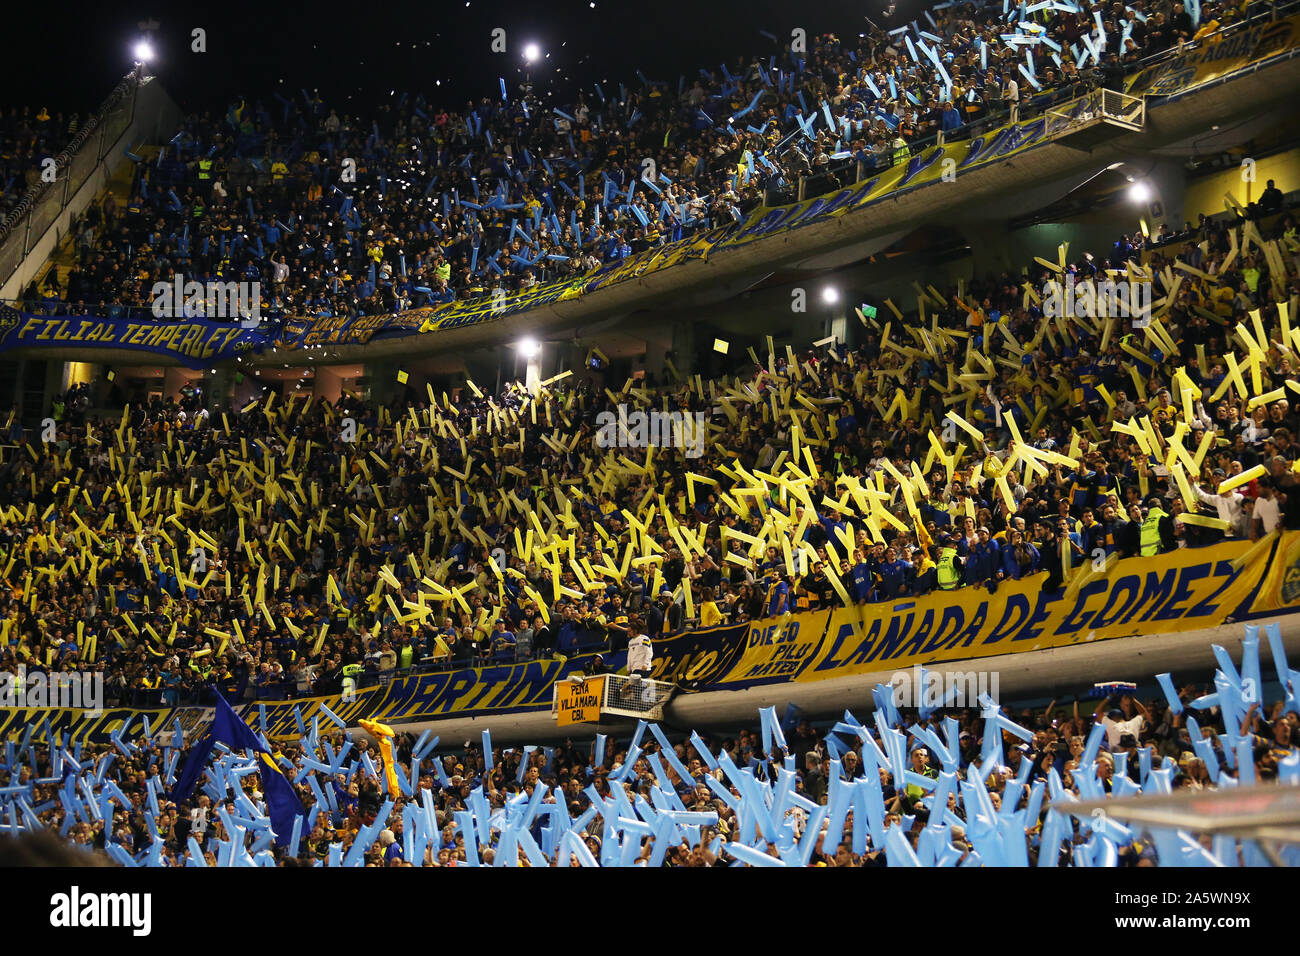 Buenos Aires, Argentina - October 22, 2019: Boca Juniors fans cheering their team in the Bombonera stadium for the semi finals of the Libertadores Cup Stock Photo